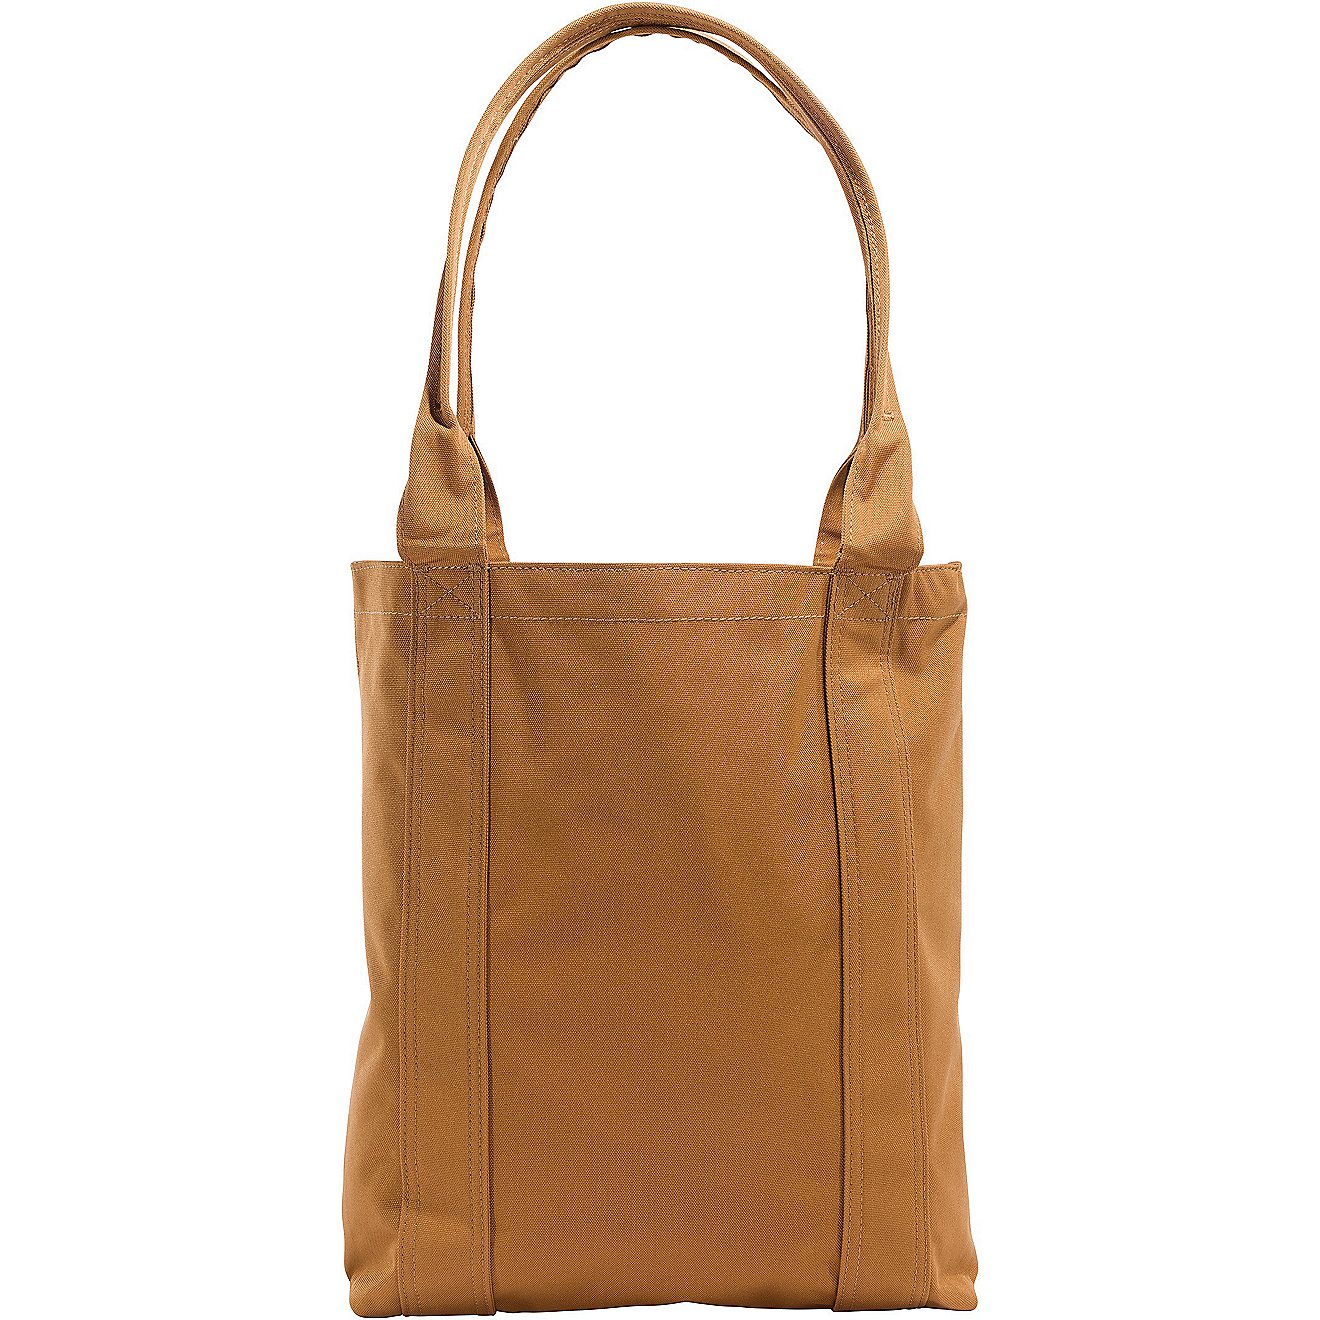 Carhartt Vertical Open Tote                                                                                                      - view number 4